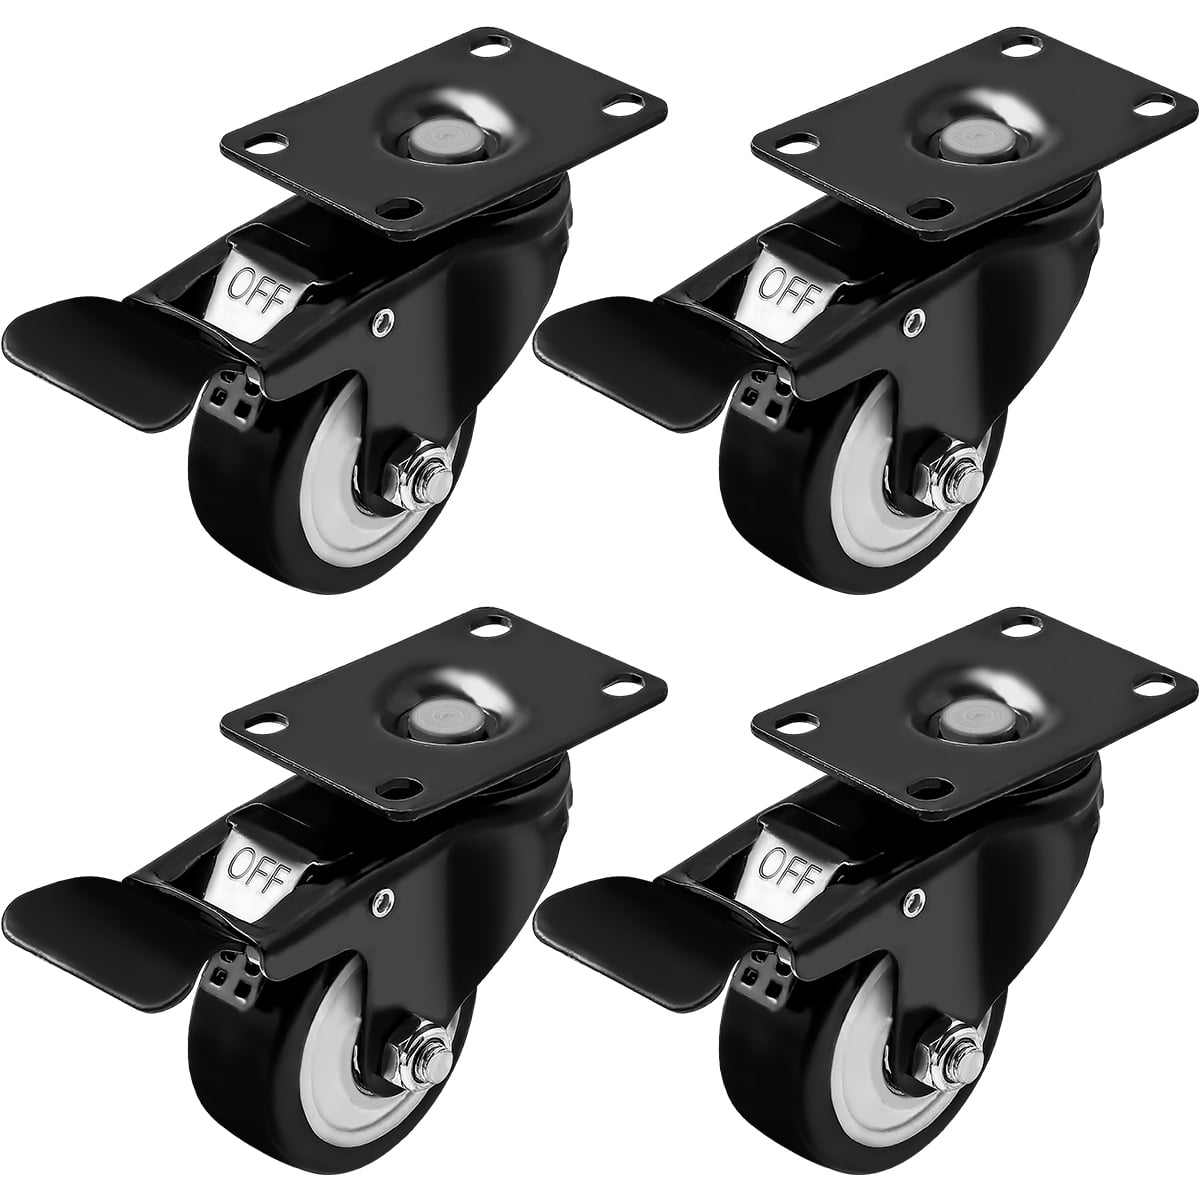 Caster Wheels Rubber Base With Top Plate & Bearing Heavy Duty Total Lock Brake 